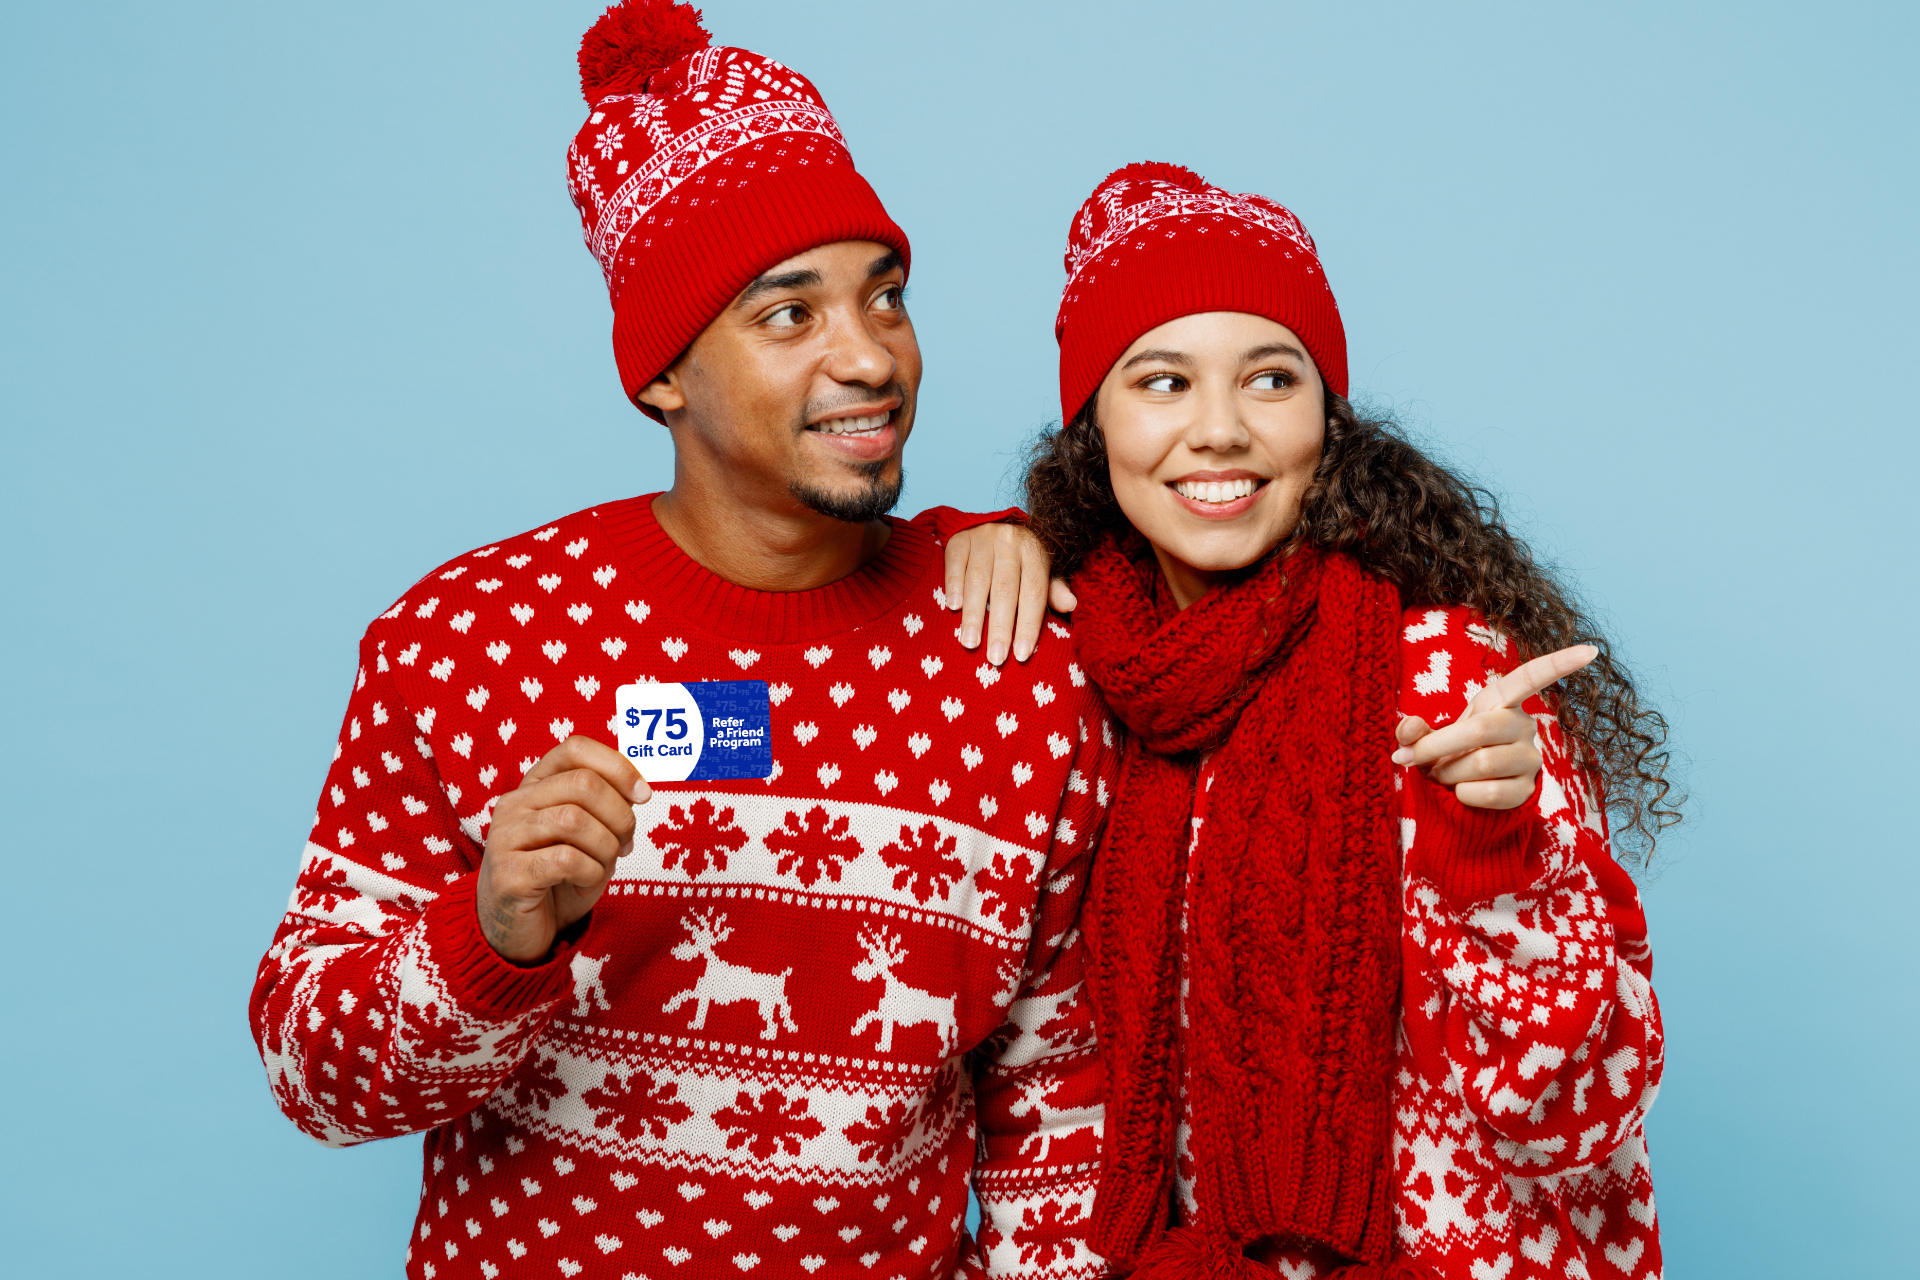 couple in winter attire holding a gift card